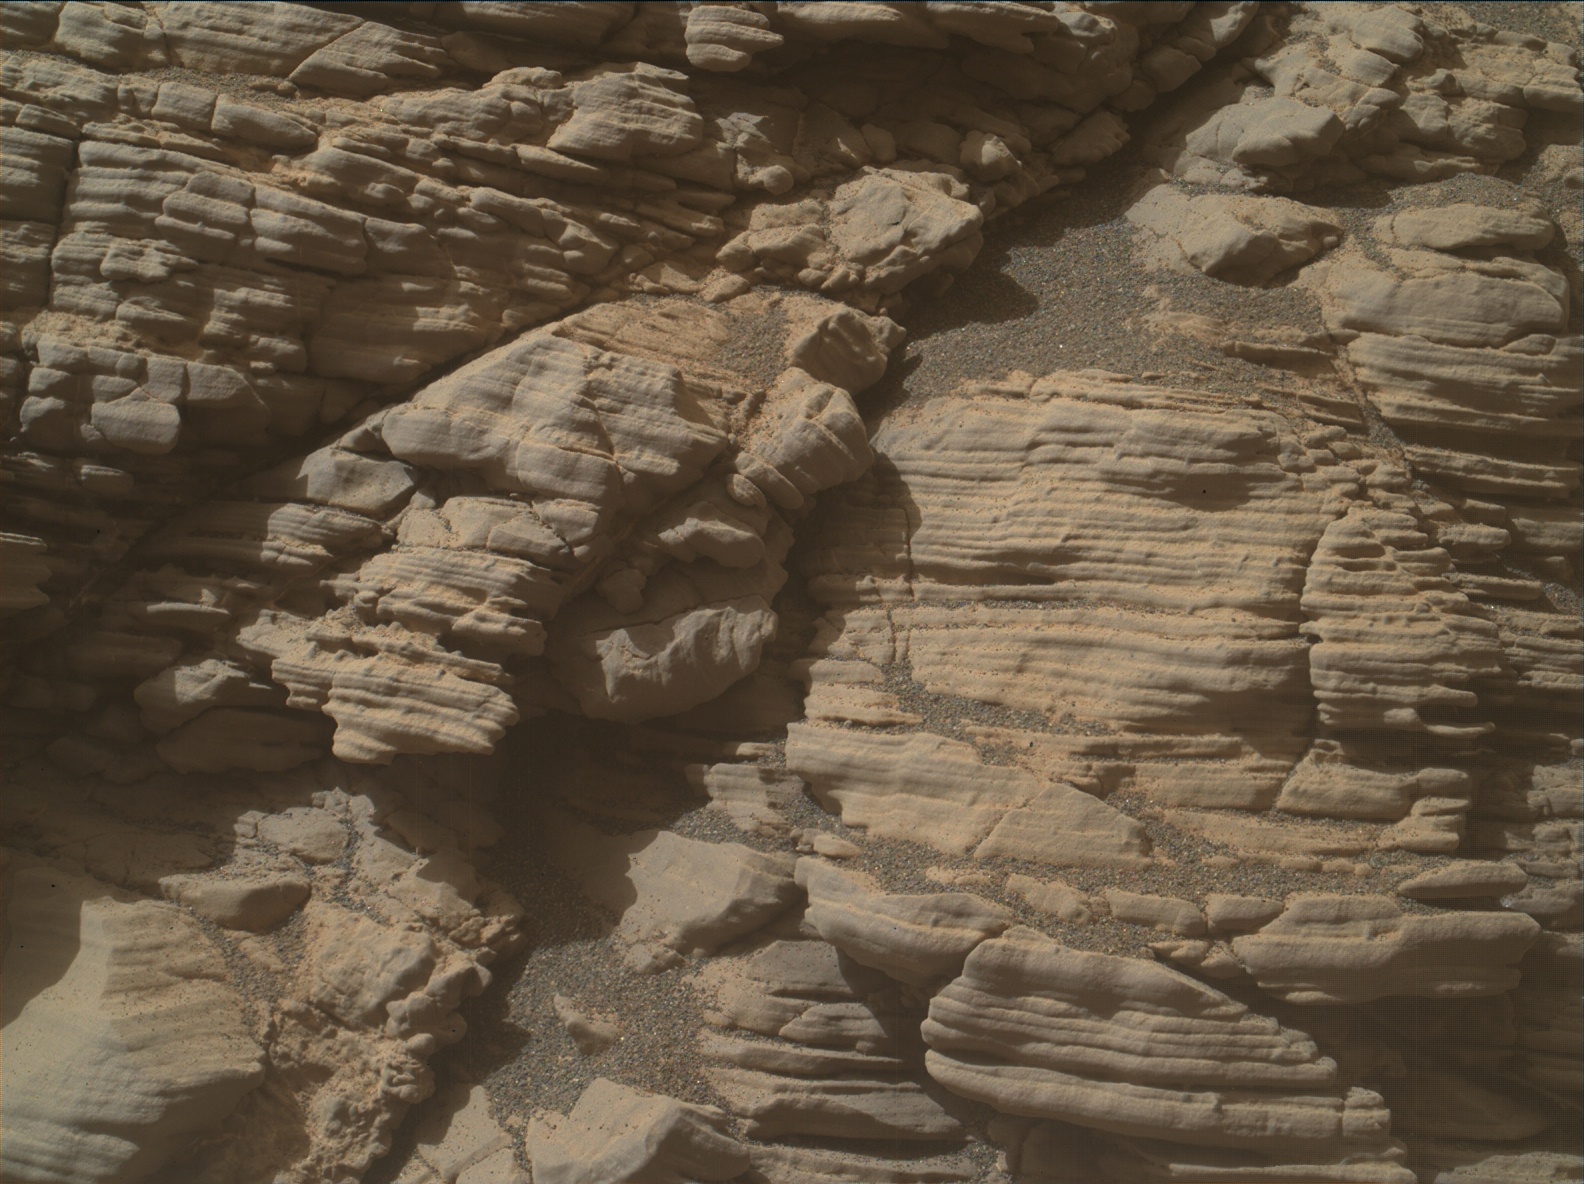 Nasa's Mars rover Curiosity acquired this image using its Mars Hand Lens Imager (MAHLI) on Sol 2929